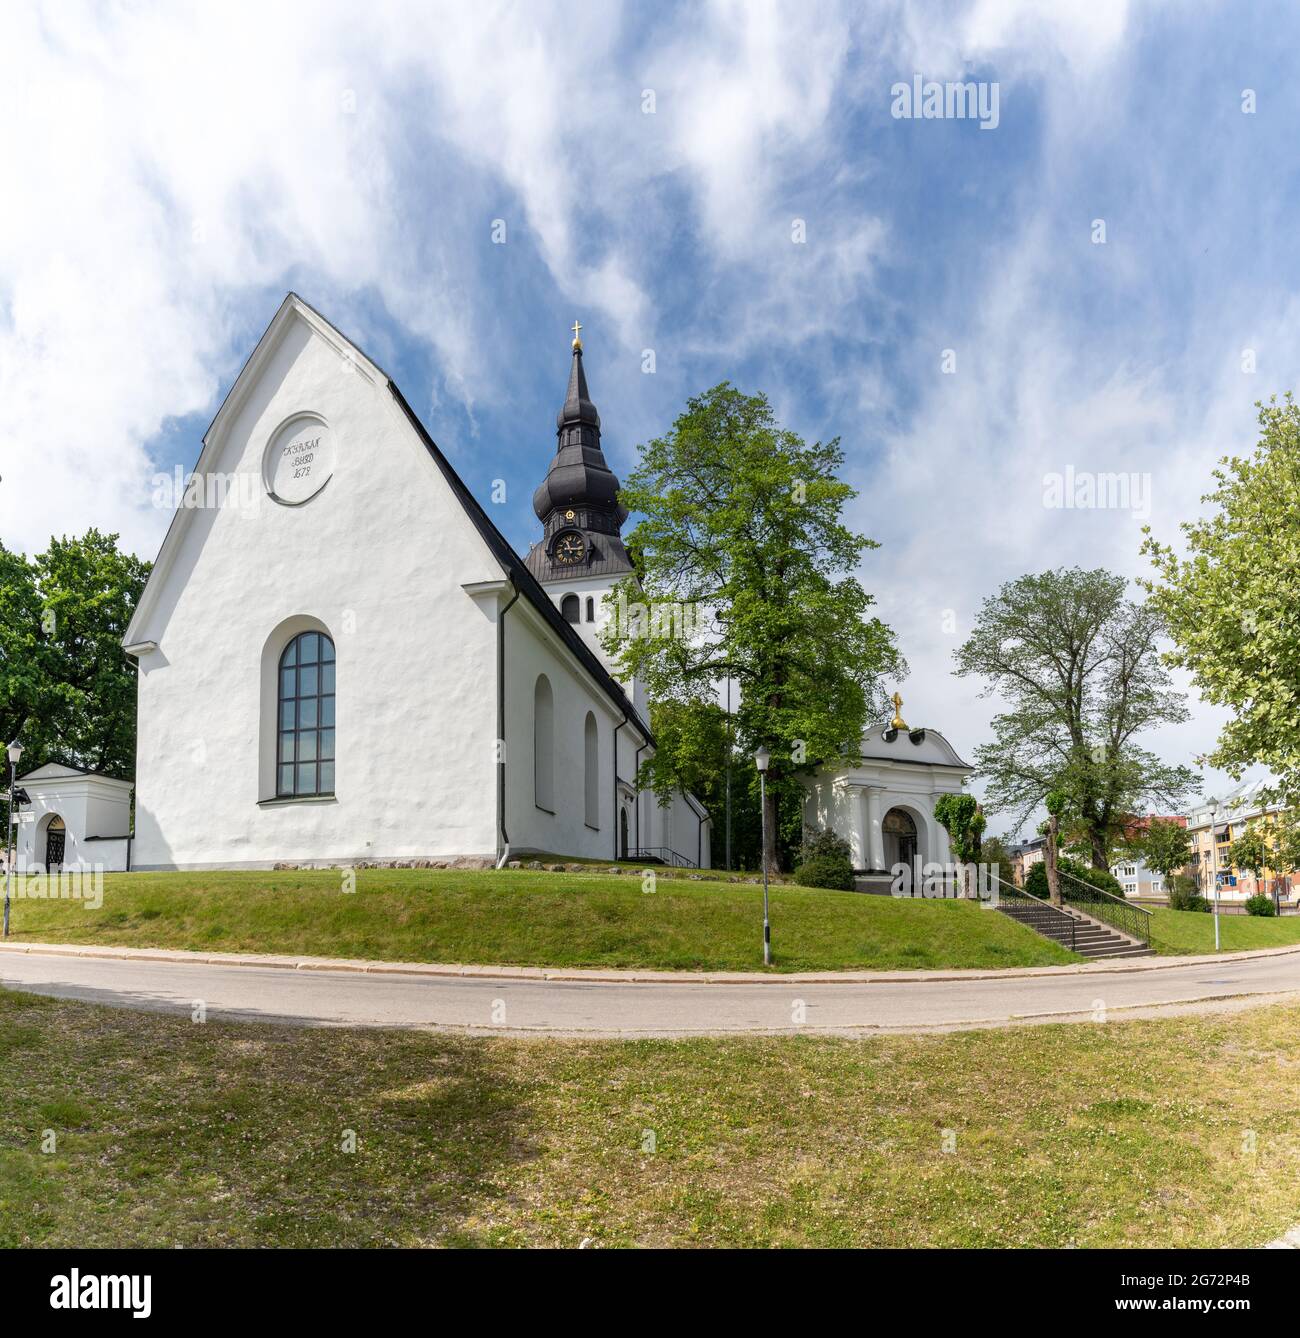 Hudiksvall, Sweden - 7 July, 2021: view of the 17th-century Hudiskvall church in the town center Stock Photo